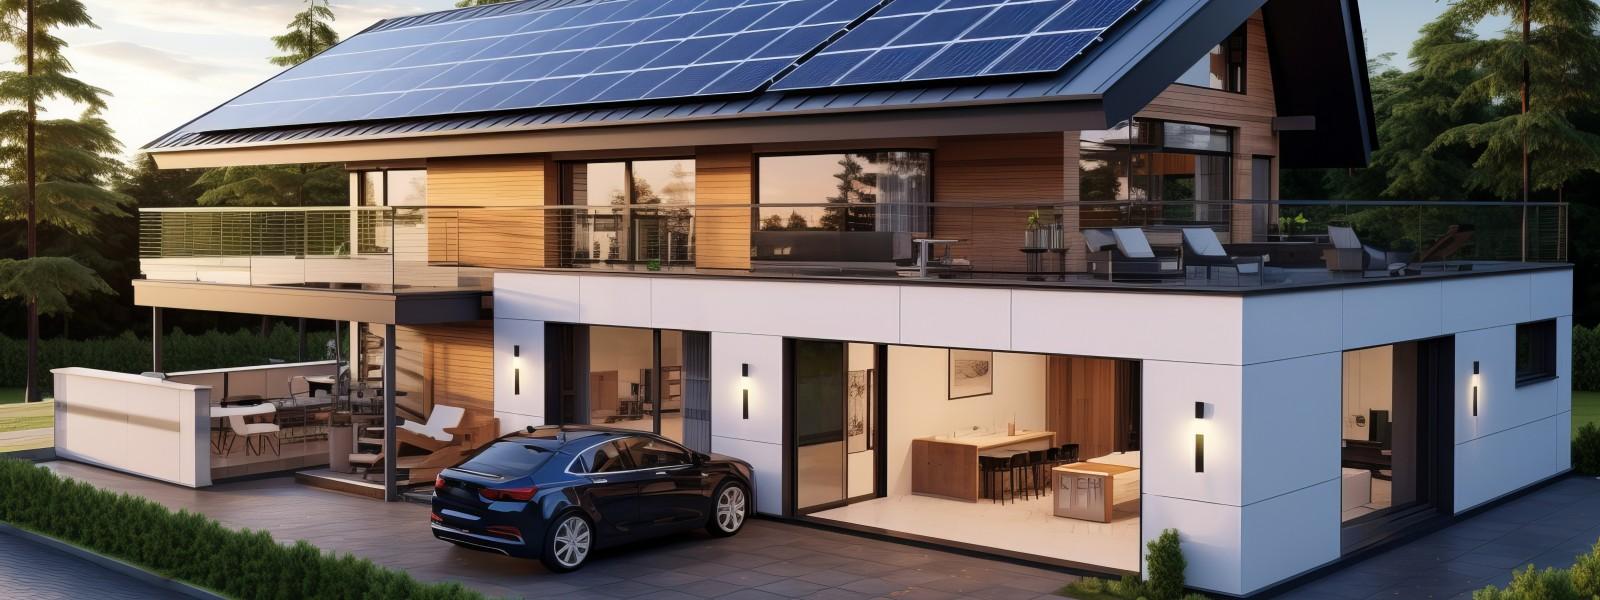 10 Benefits of Solar Power for East Bay Homeowners